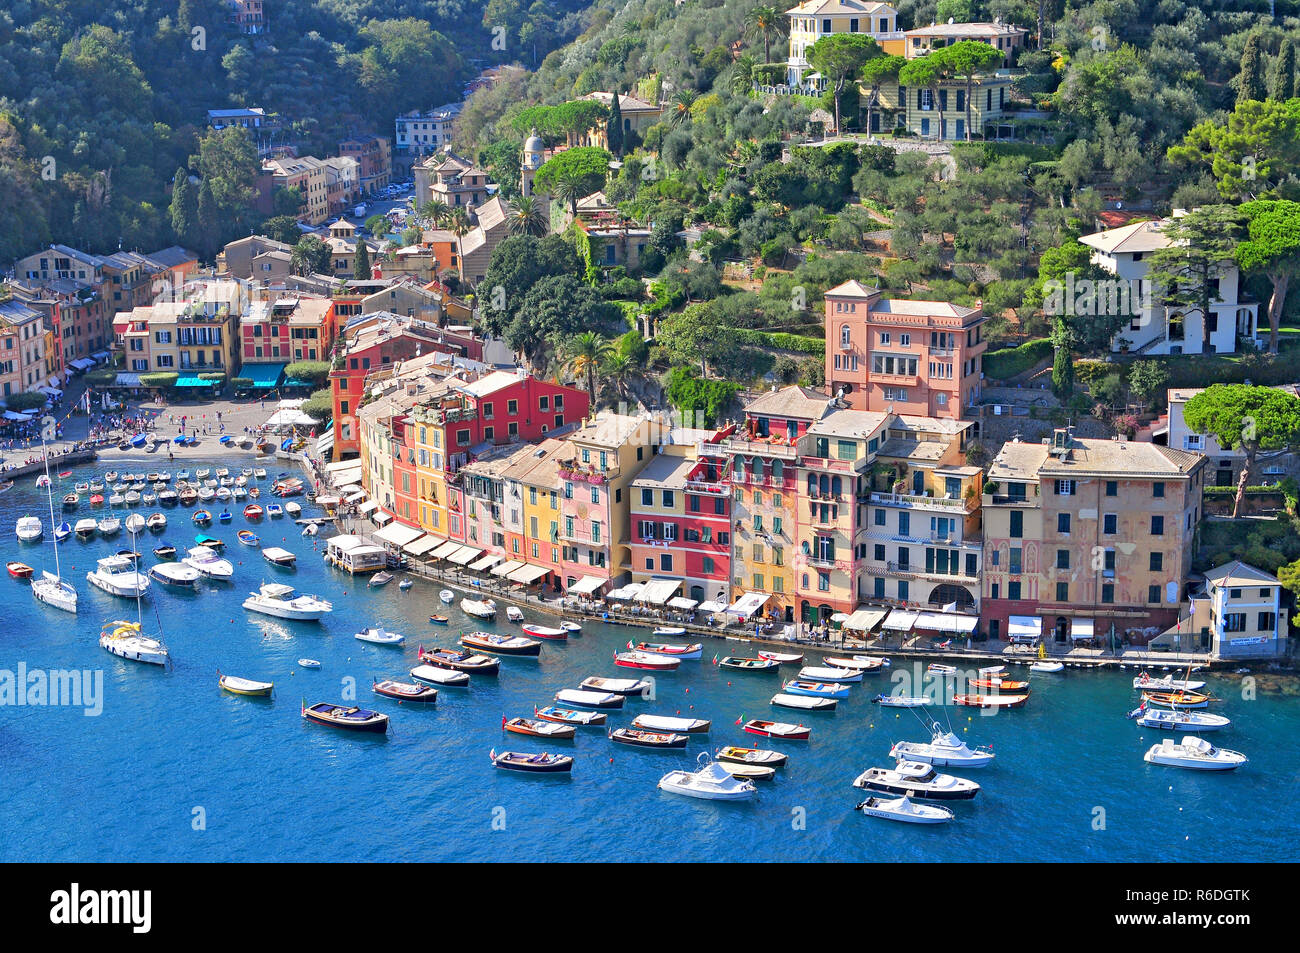 Liguria Portofino, View Of Harbor With Moored Boats And Pastel Colored Houses Lining The Bay With Trees On Hills Behind, Italy Stock Photo